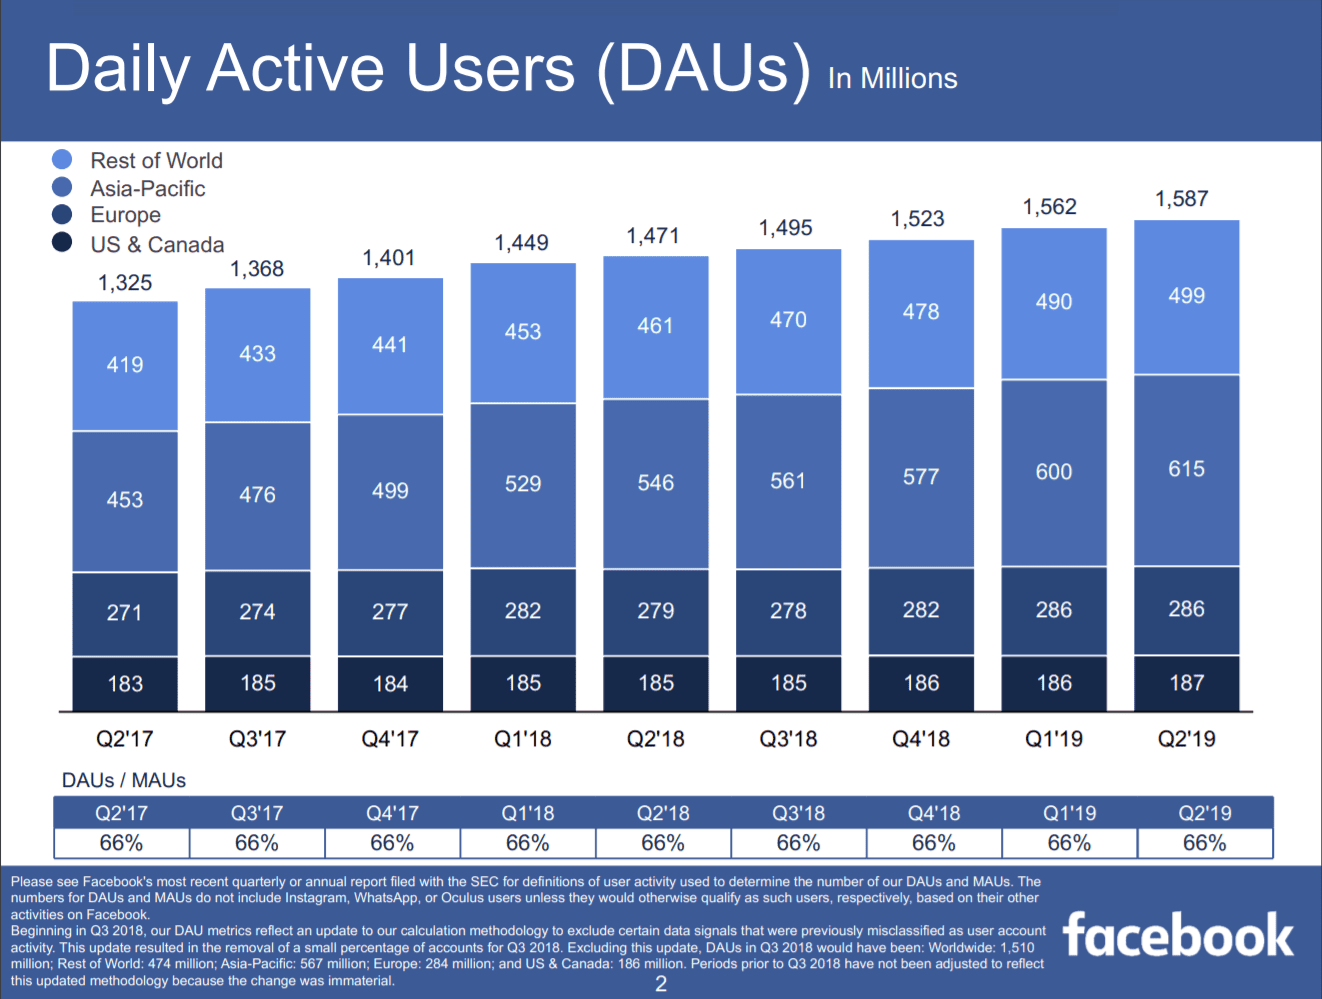 There are not 1.59 billion daily active users on Facebook